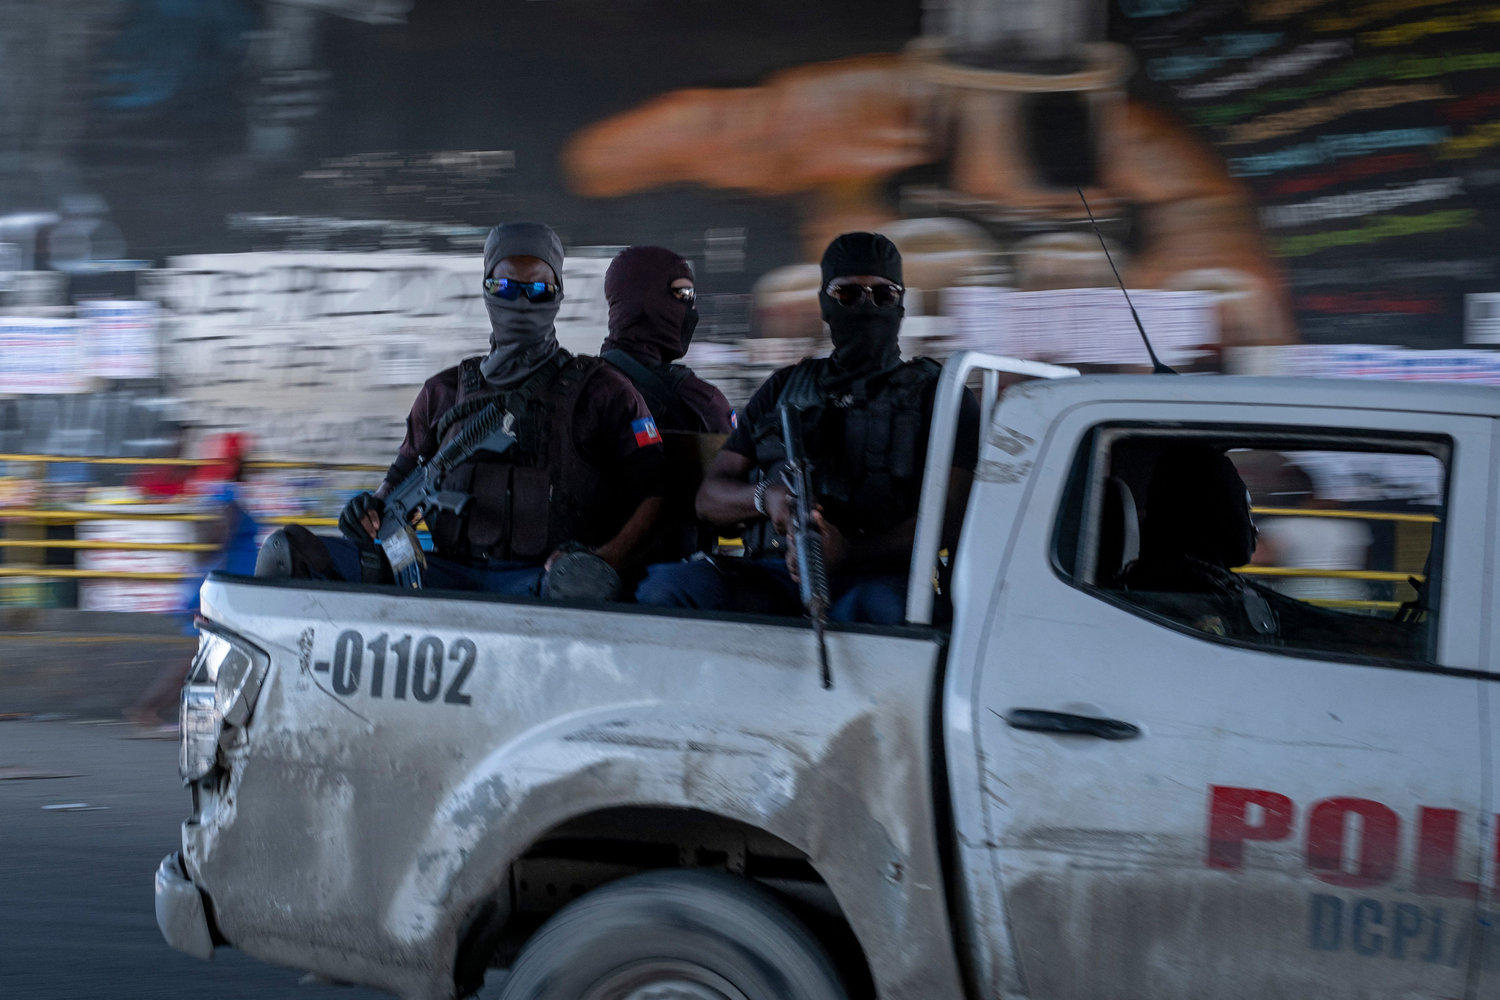 Haitian National Police patrols the streets on Oct. 27, 2021. (Ricardo Arduengo/AFP/Getty Images/TNS)